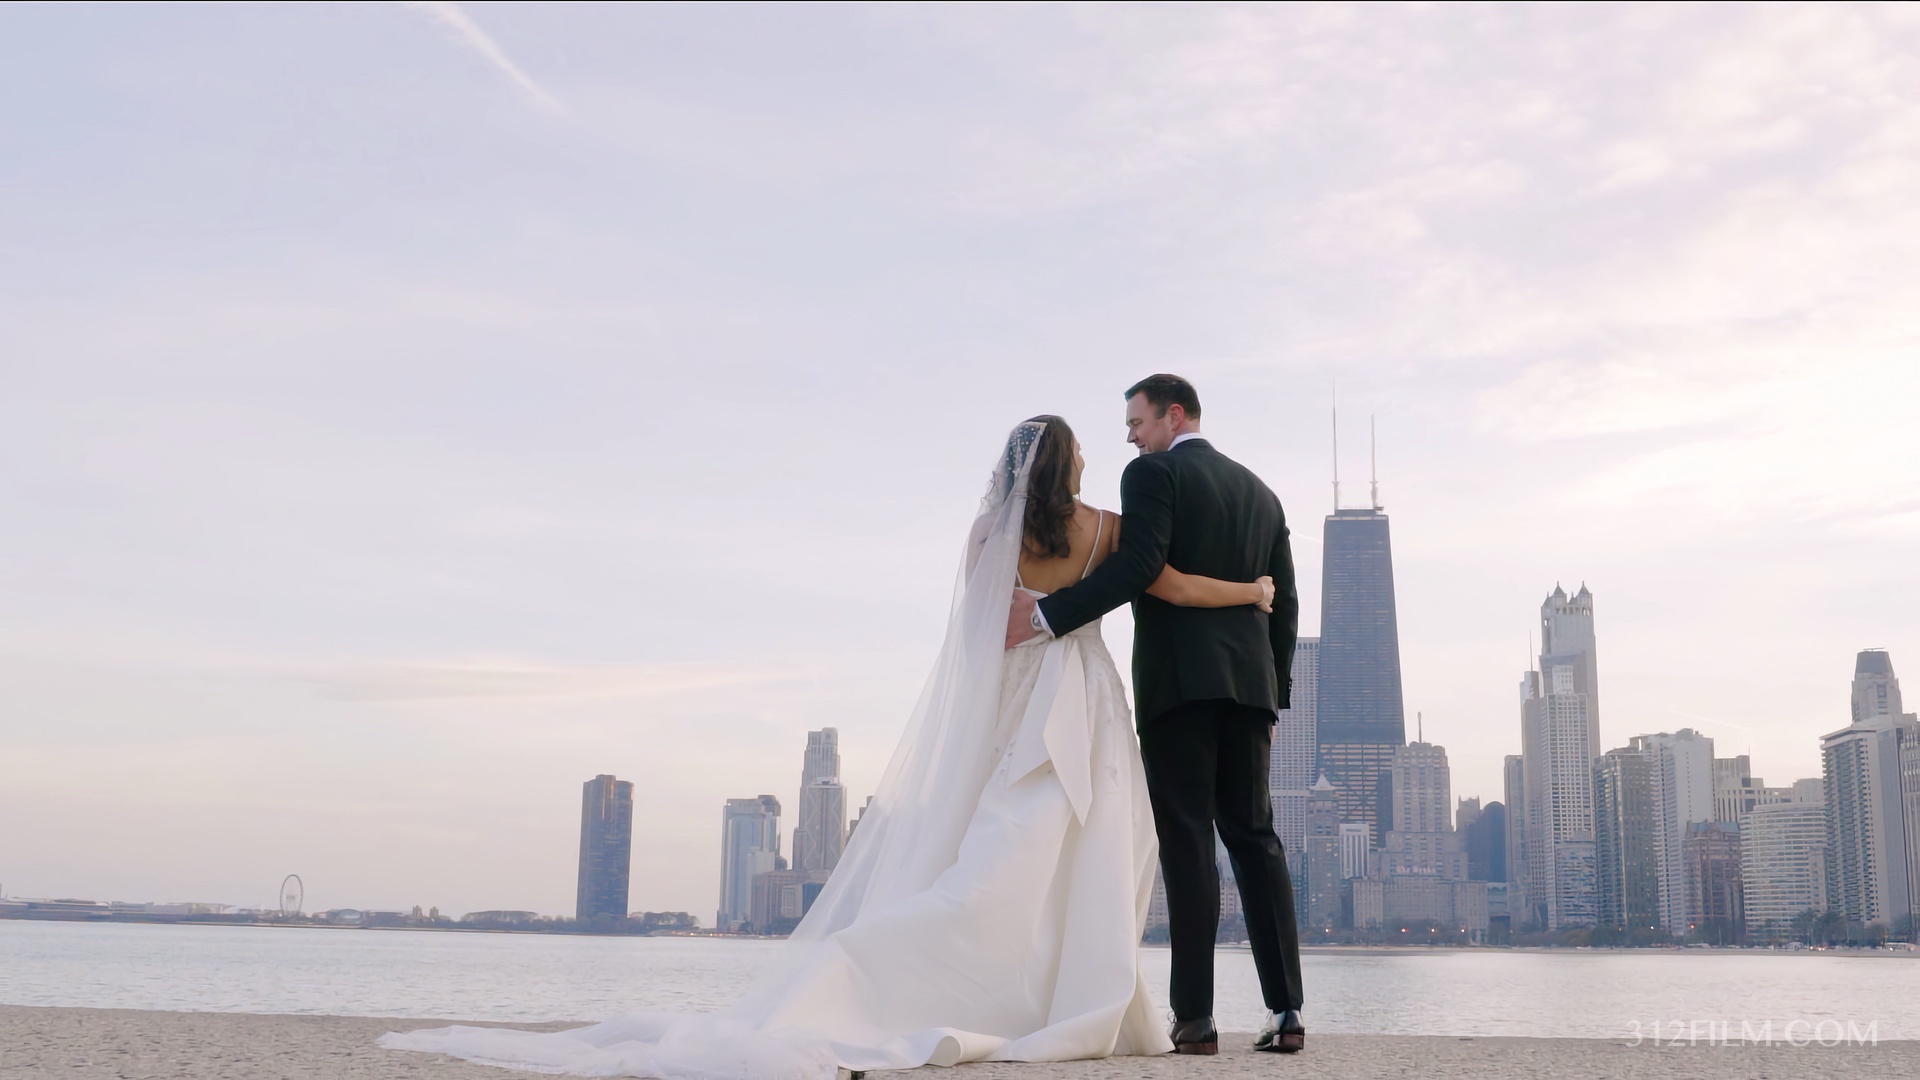 A bride and groom standing on a beach in front of a Chicago city skyline